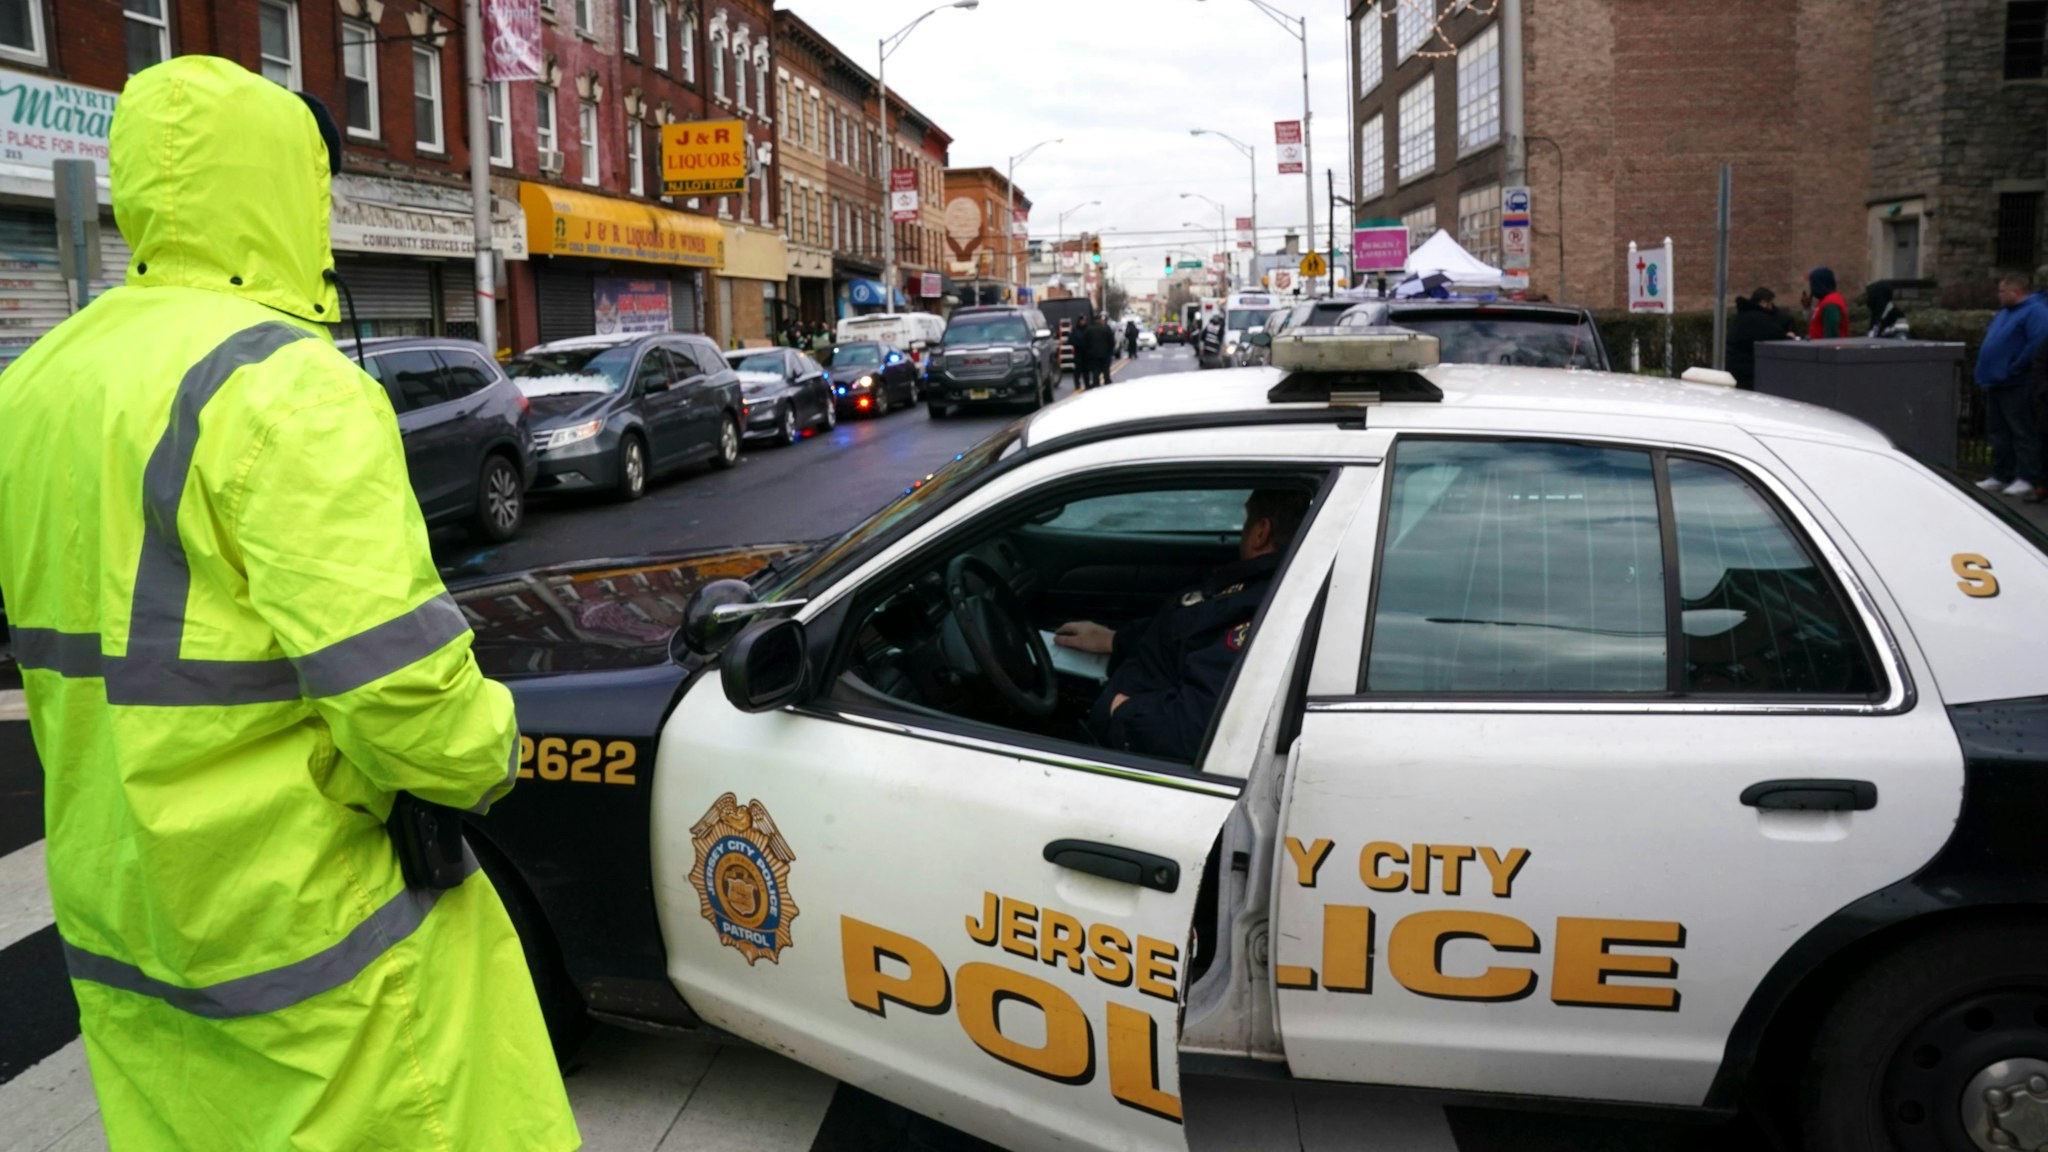 Jersey City Police gather at the scene of the December 10, 2019 shooting at a Jewish Deli on December 11, 2019 in Jersey City, New Jersey. - The shooters who unleashed a deadly firefight in Jersey City deliberately targeted a kosher grocery, the city's mayor said December 11, 2019, suggesting that it was an anti-Semitic attack."Last night after extensive review of our CCTV system it has now become clear from the cameras that these two individuals targeted the Kosher grocery," wrote Jersey City Mayor Steven Fulop on Twitter.